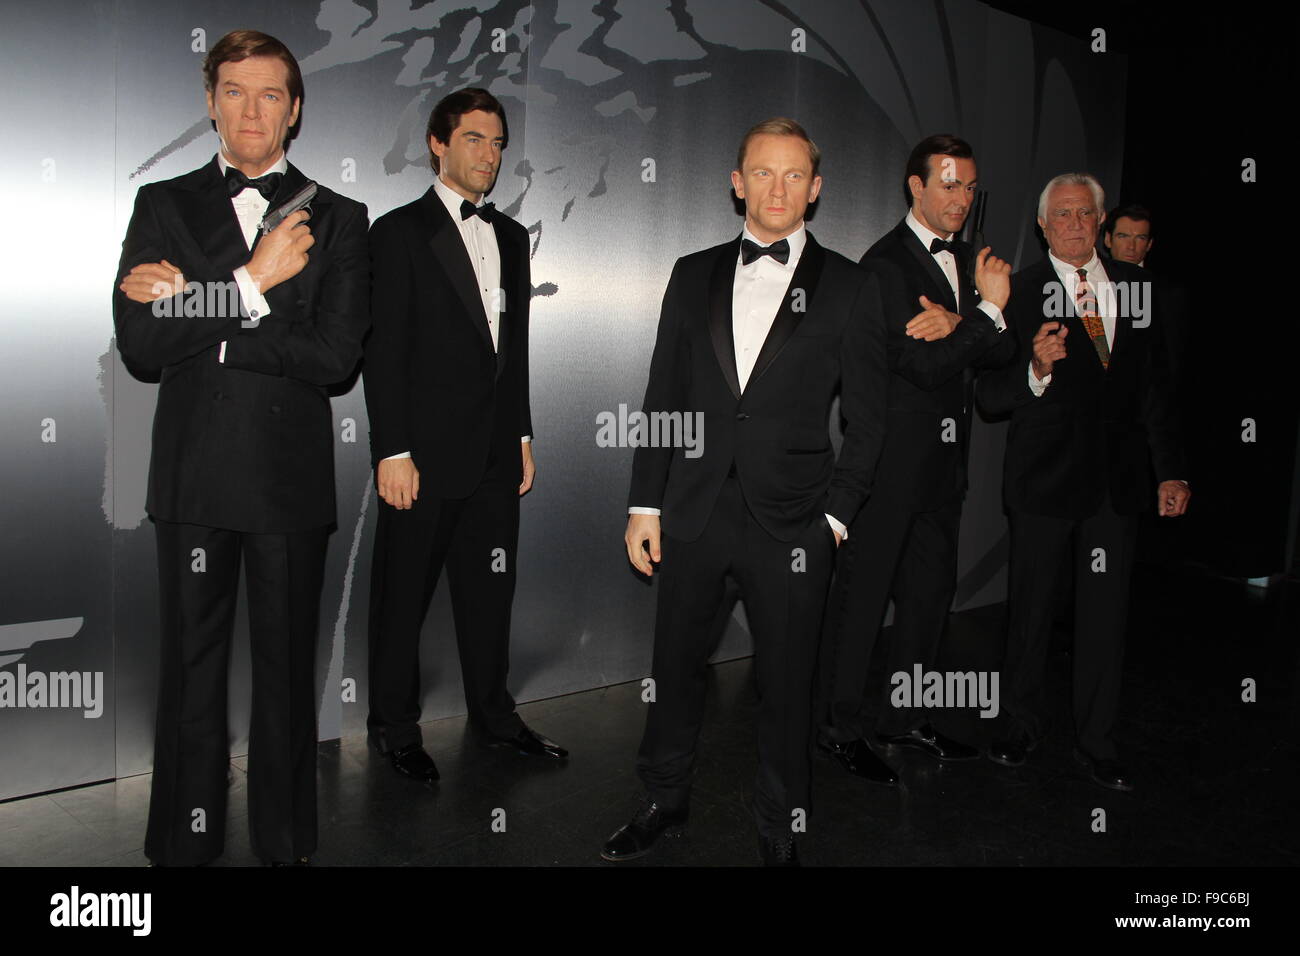 Hollywood, California, USA. 15th Dec, 2015. I15797CHW.Madame Tussauds Hollywood Reveal All Six James Bonds In Wax With Special Guest George Lazenby Madame Tussauds-Hollywood, Hollywood, CA.12/15/2015.GEORGE LAZENBY POSING WITH A WAX FIGURE OF HIS JAMES BOND CHARACTER AND WITH WAX FIGURES OF ACTORS SEAN CONNERY, DANIEL CRAIG, TIMOTHY DALTON AND SIR ROGER MOORE .©Clinton H. Wallace/Photomundo International/ Photos Inc © Clinton Wallace/Globe Photos/ZUMA Wire/Alamy Live News Stock Photo